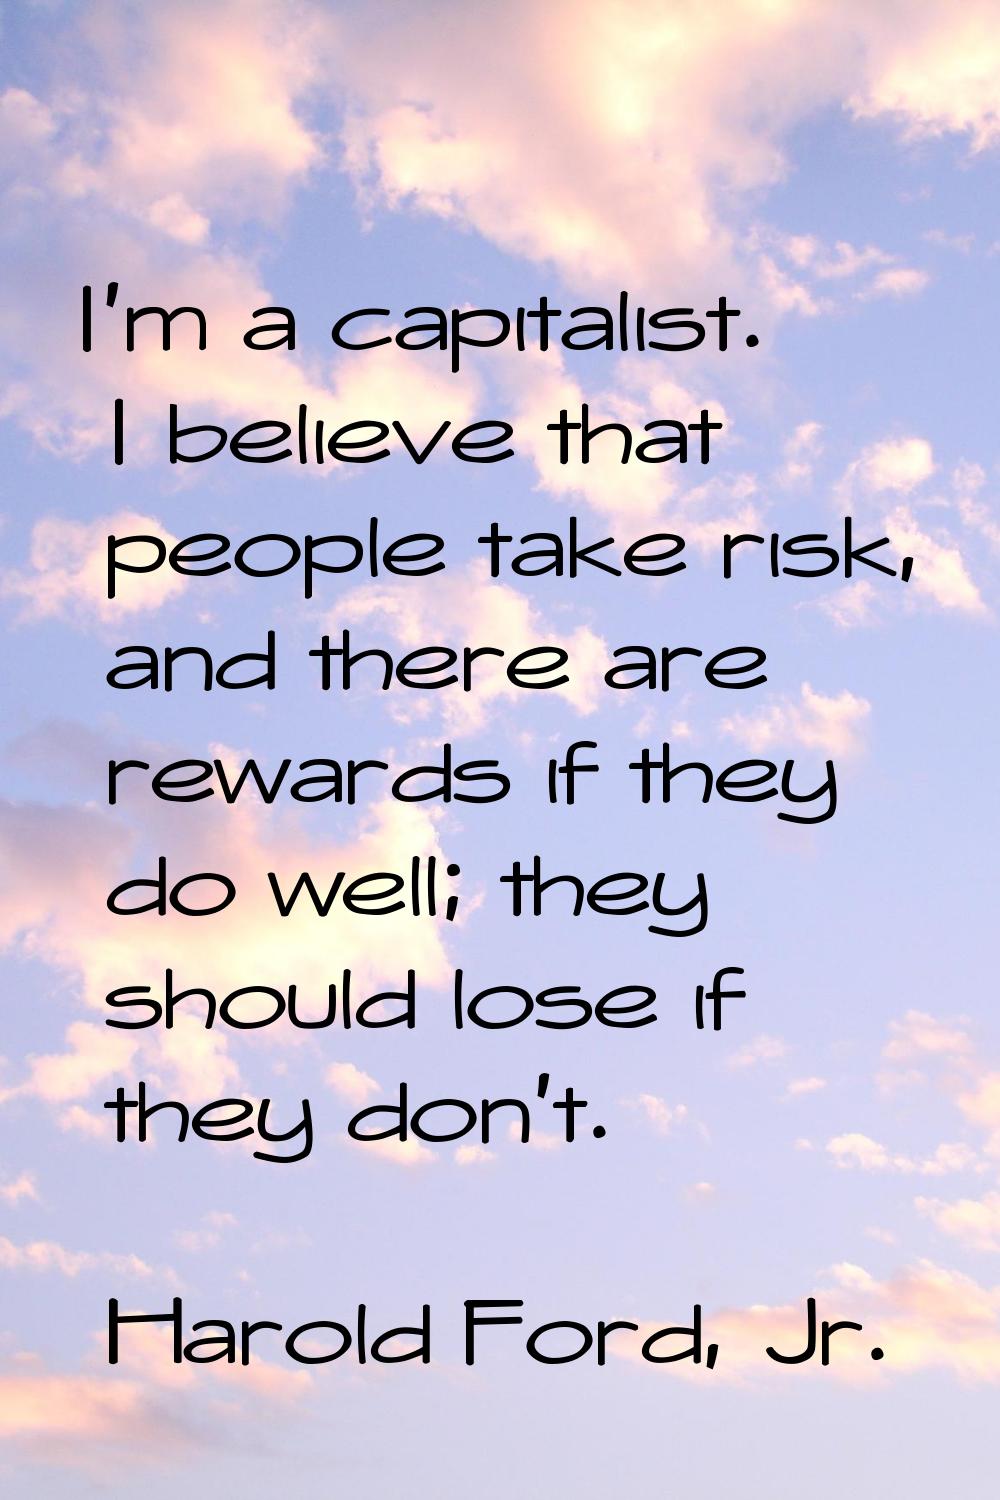 I'm a capitalist. I believe that people take risk, and there are rewards if they do well; they shou